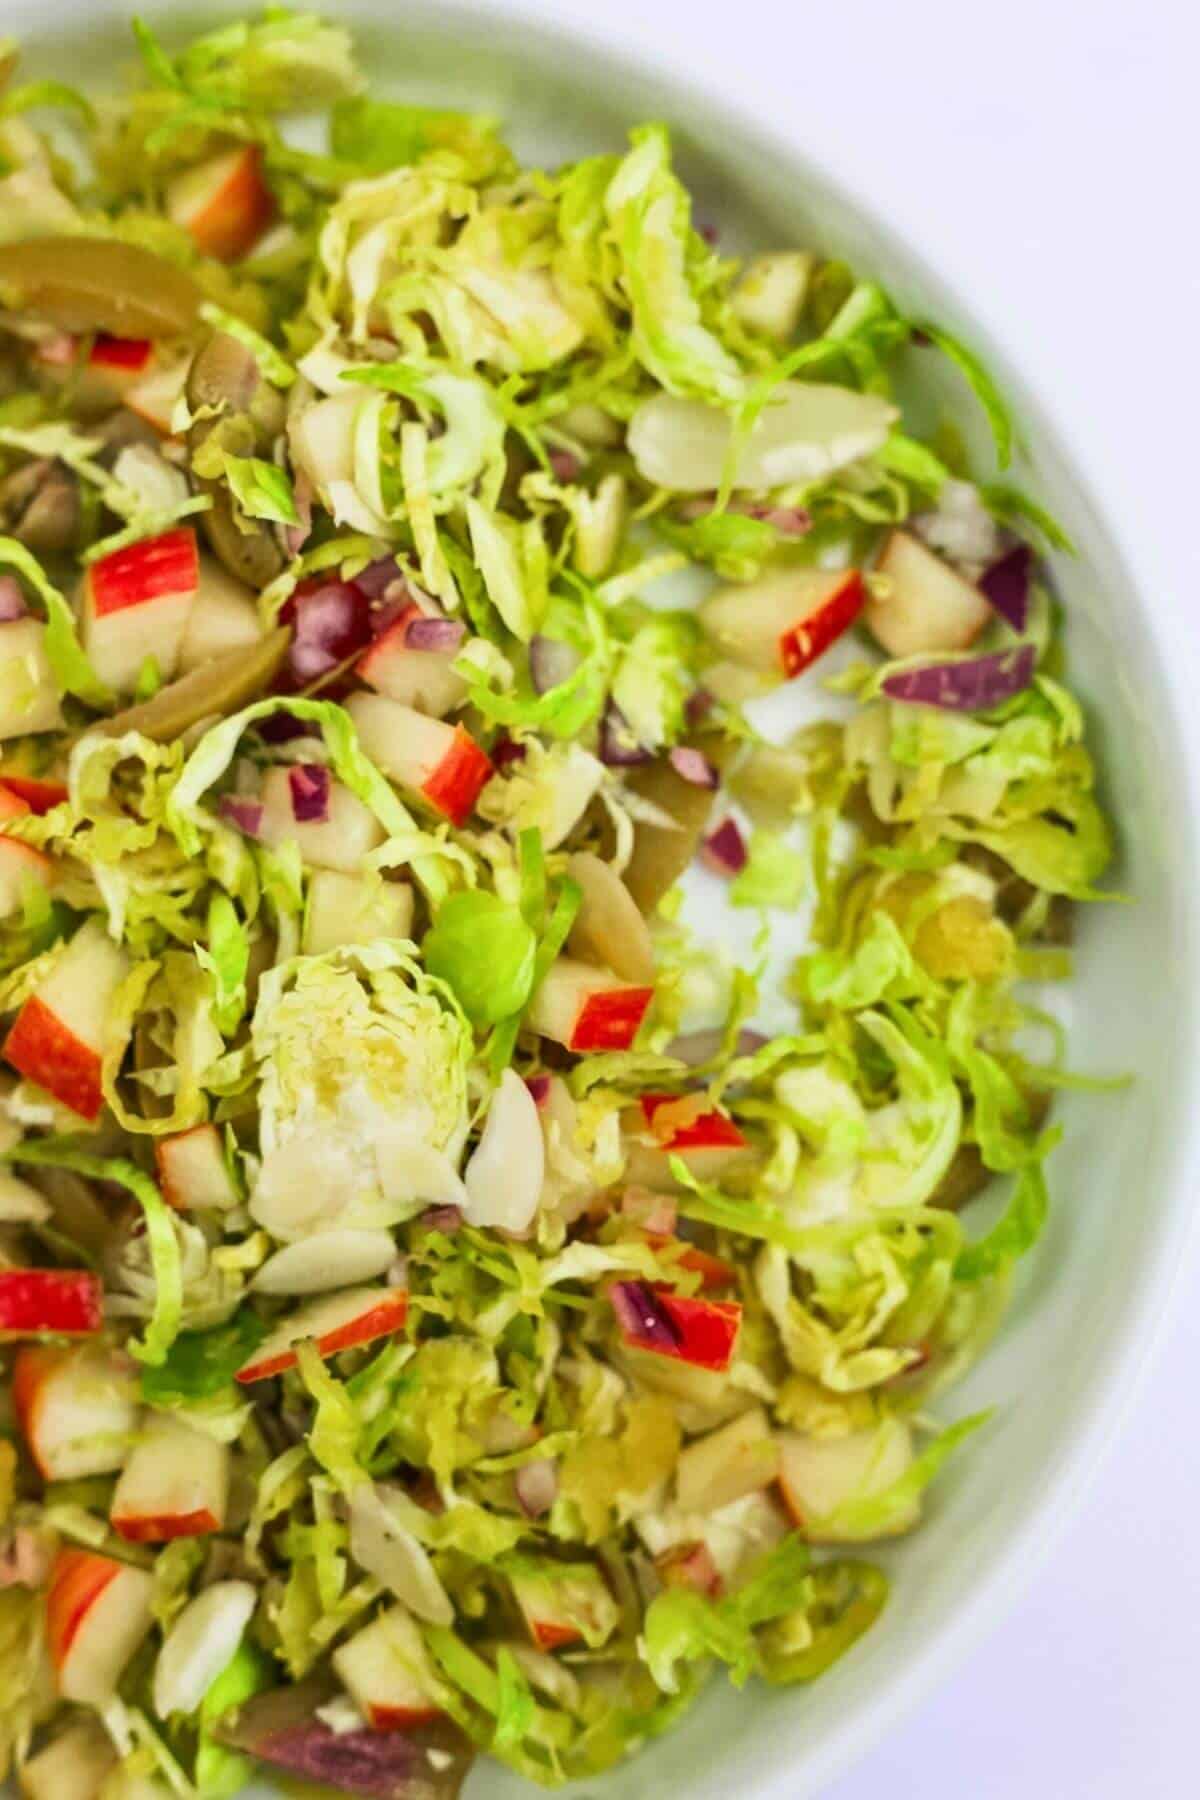 A salad with shredded greens and diced apple in a white ceramic bowl.